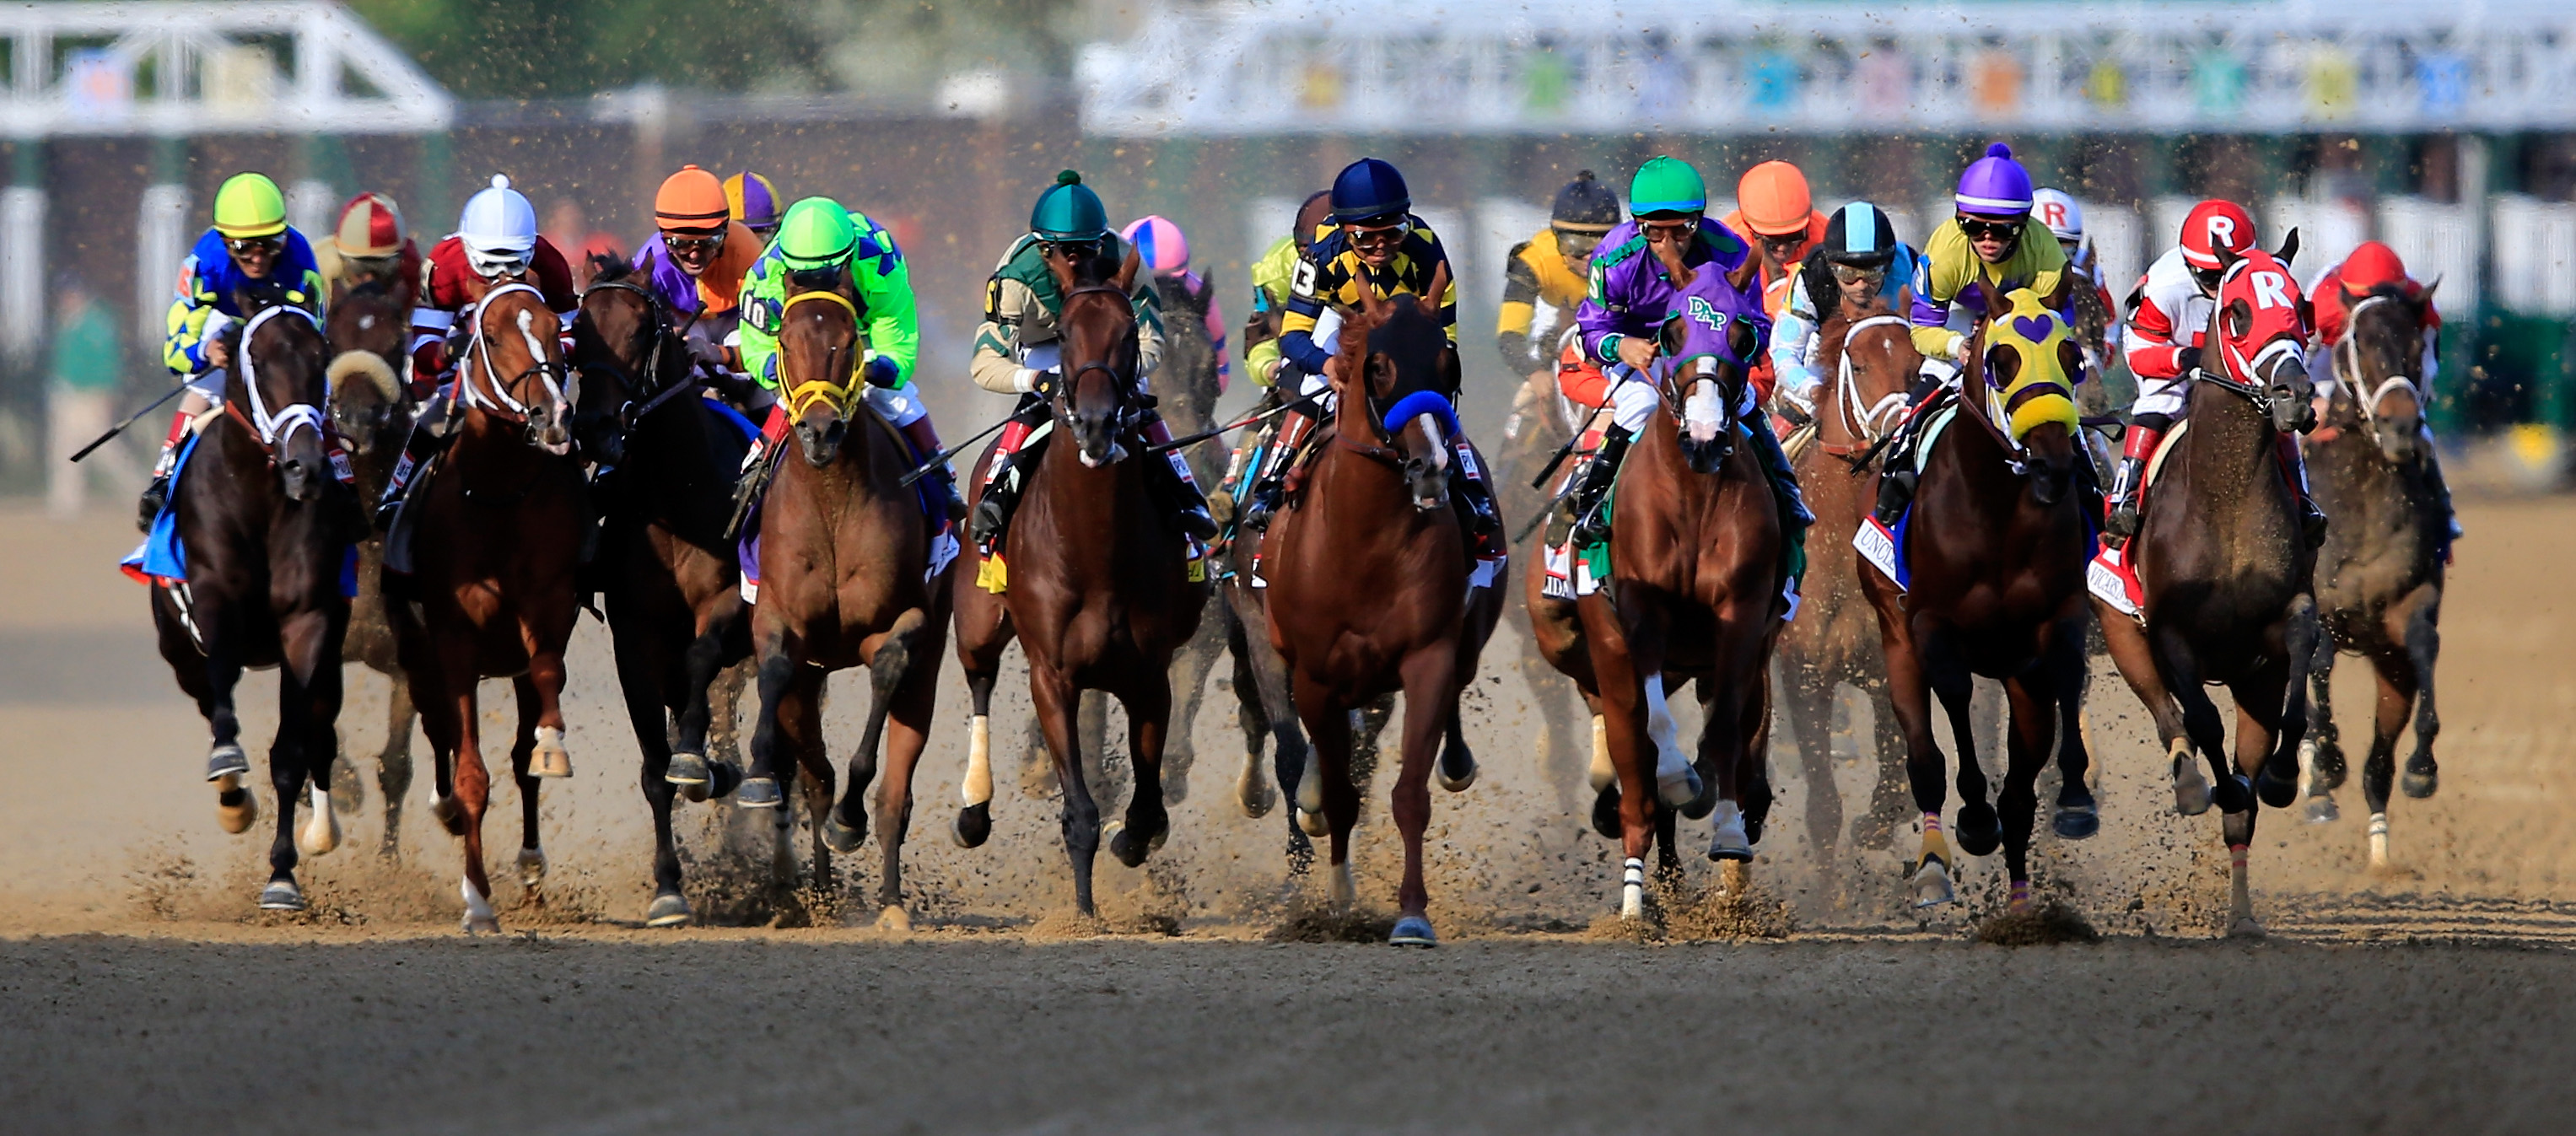 Top 10 things you need to know when visiting the Kentucky Derby A